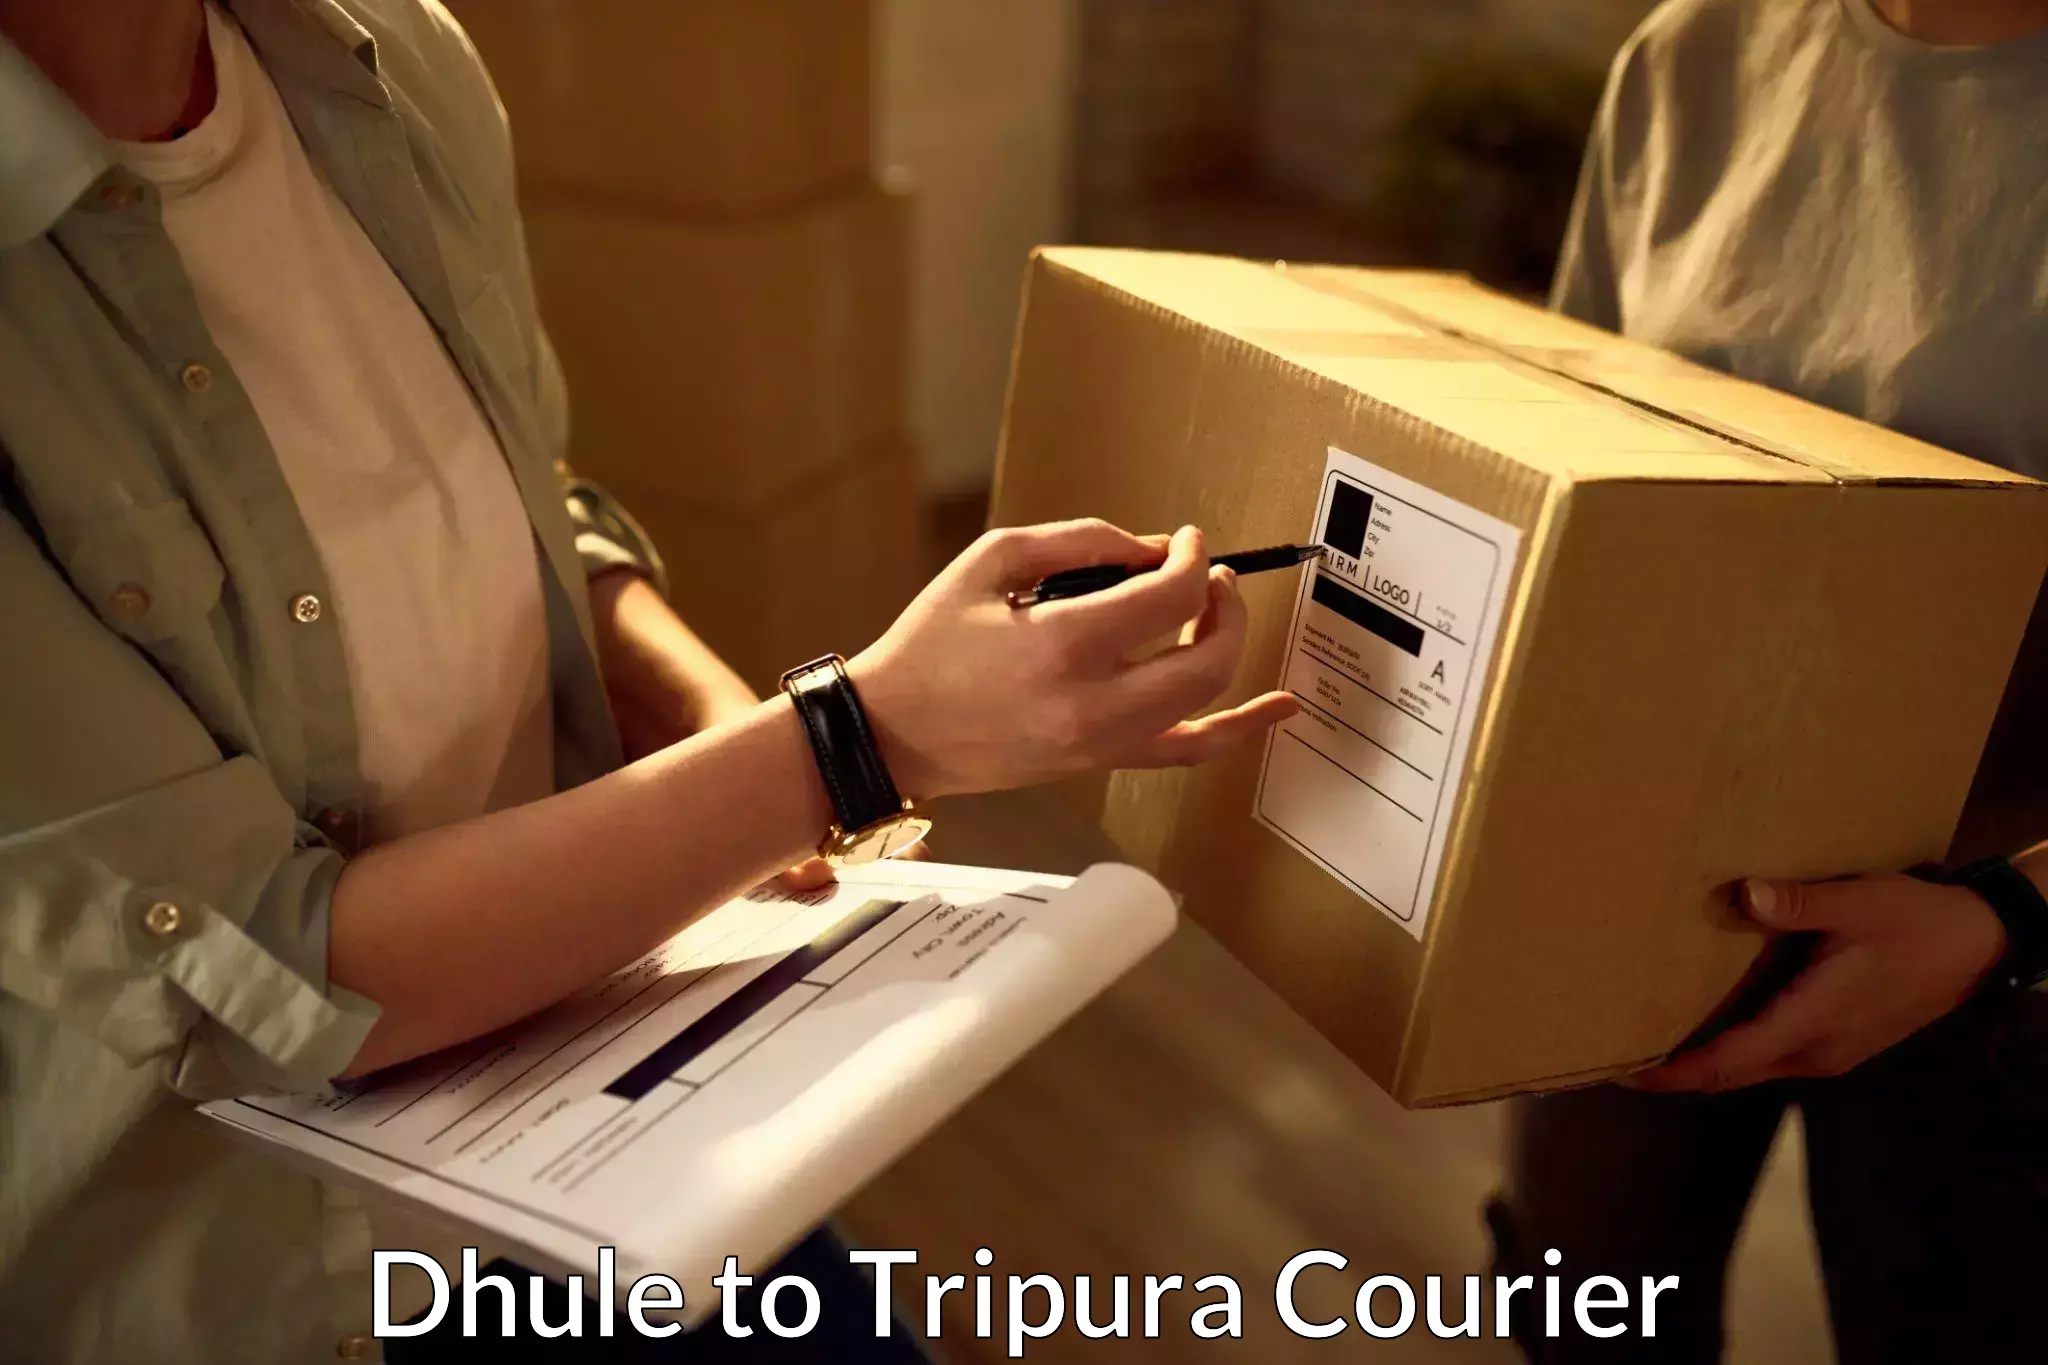 Specialized shipment handling Dhule to Tripura